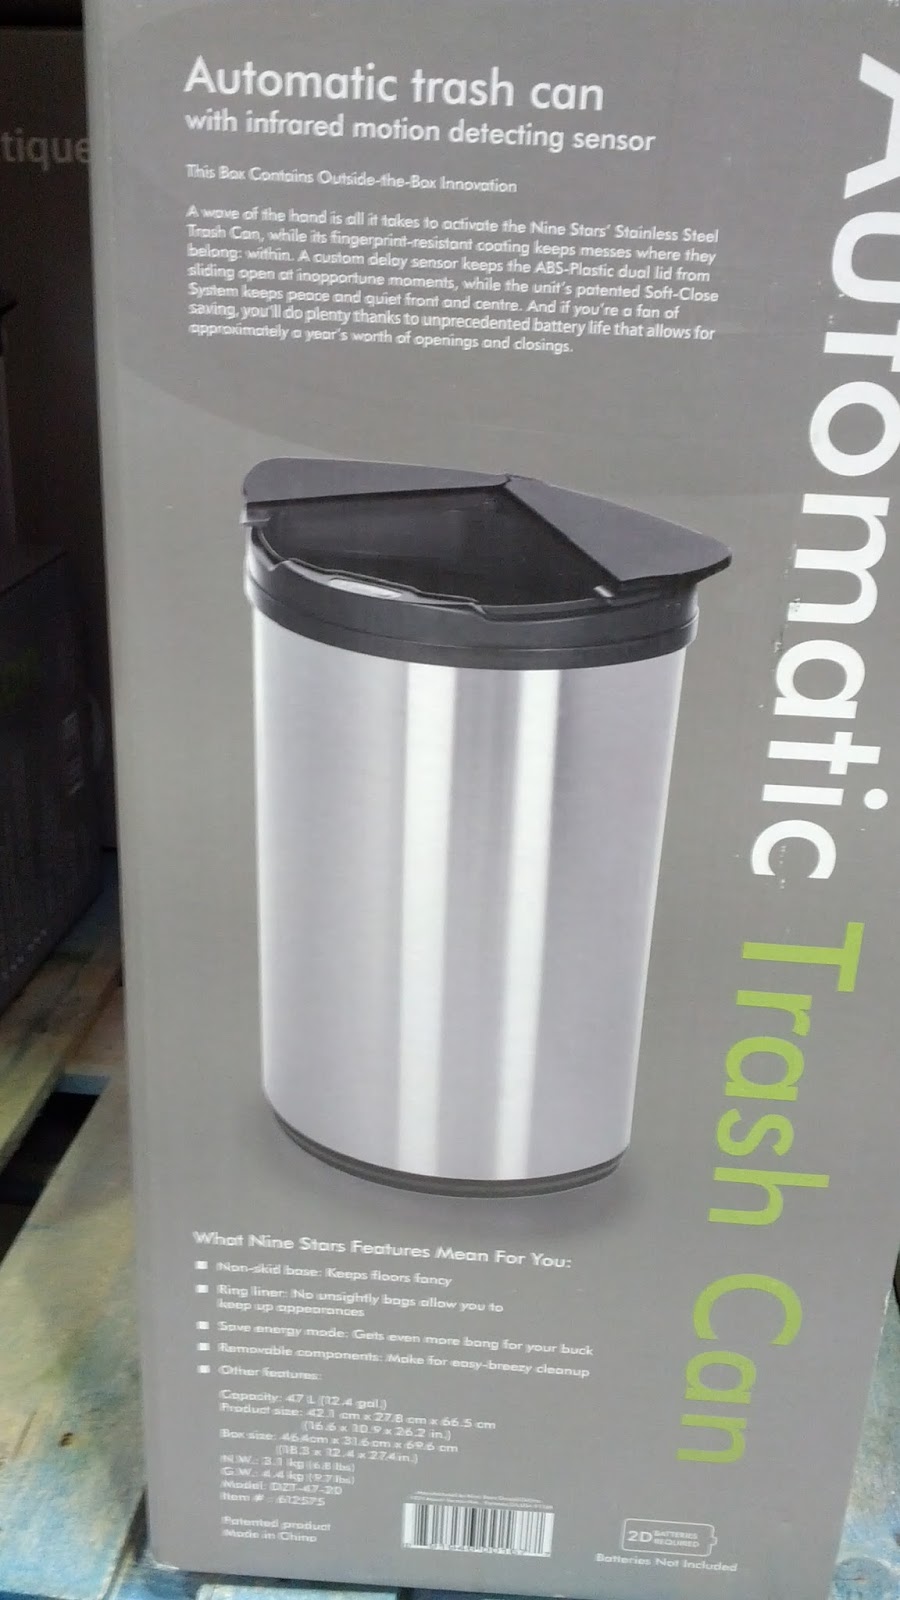 Stunning costco trash can touchless Nine Stars Automatic Stainless Steel Trash Can Costco Weekender